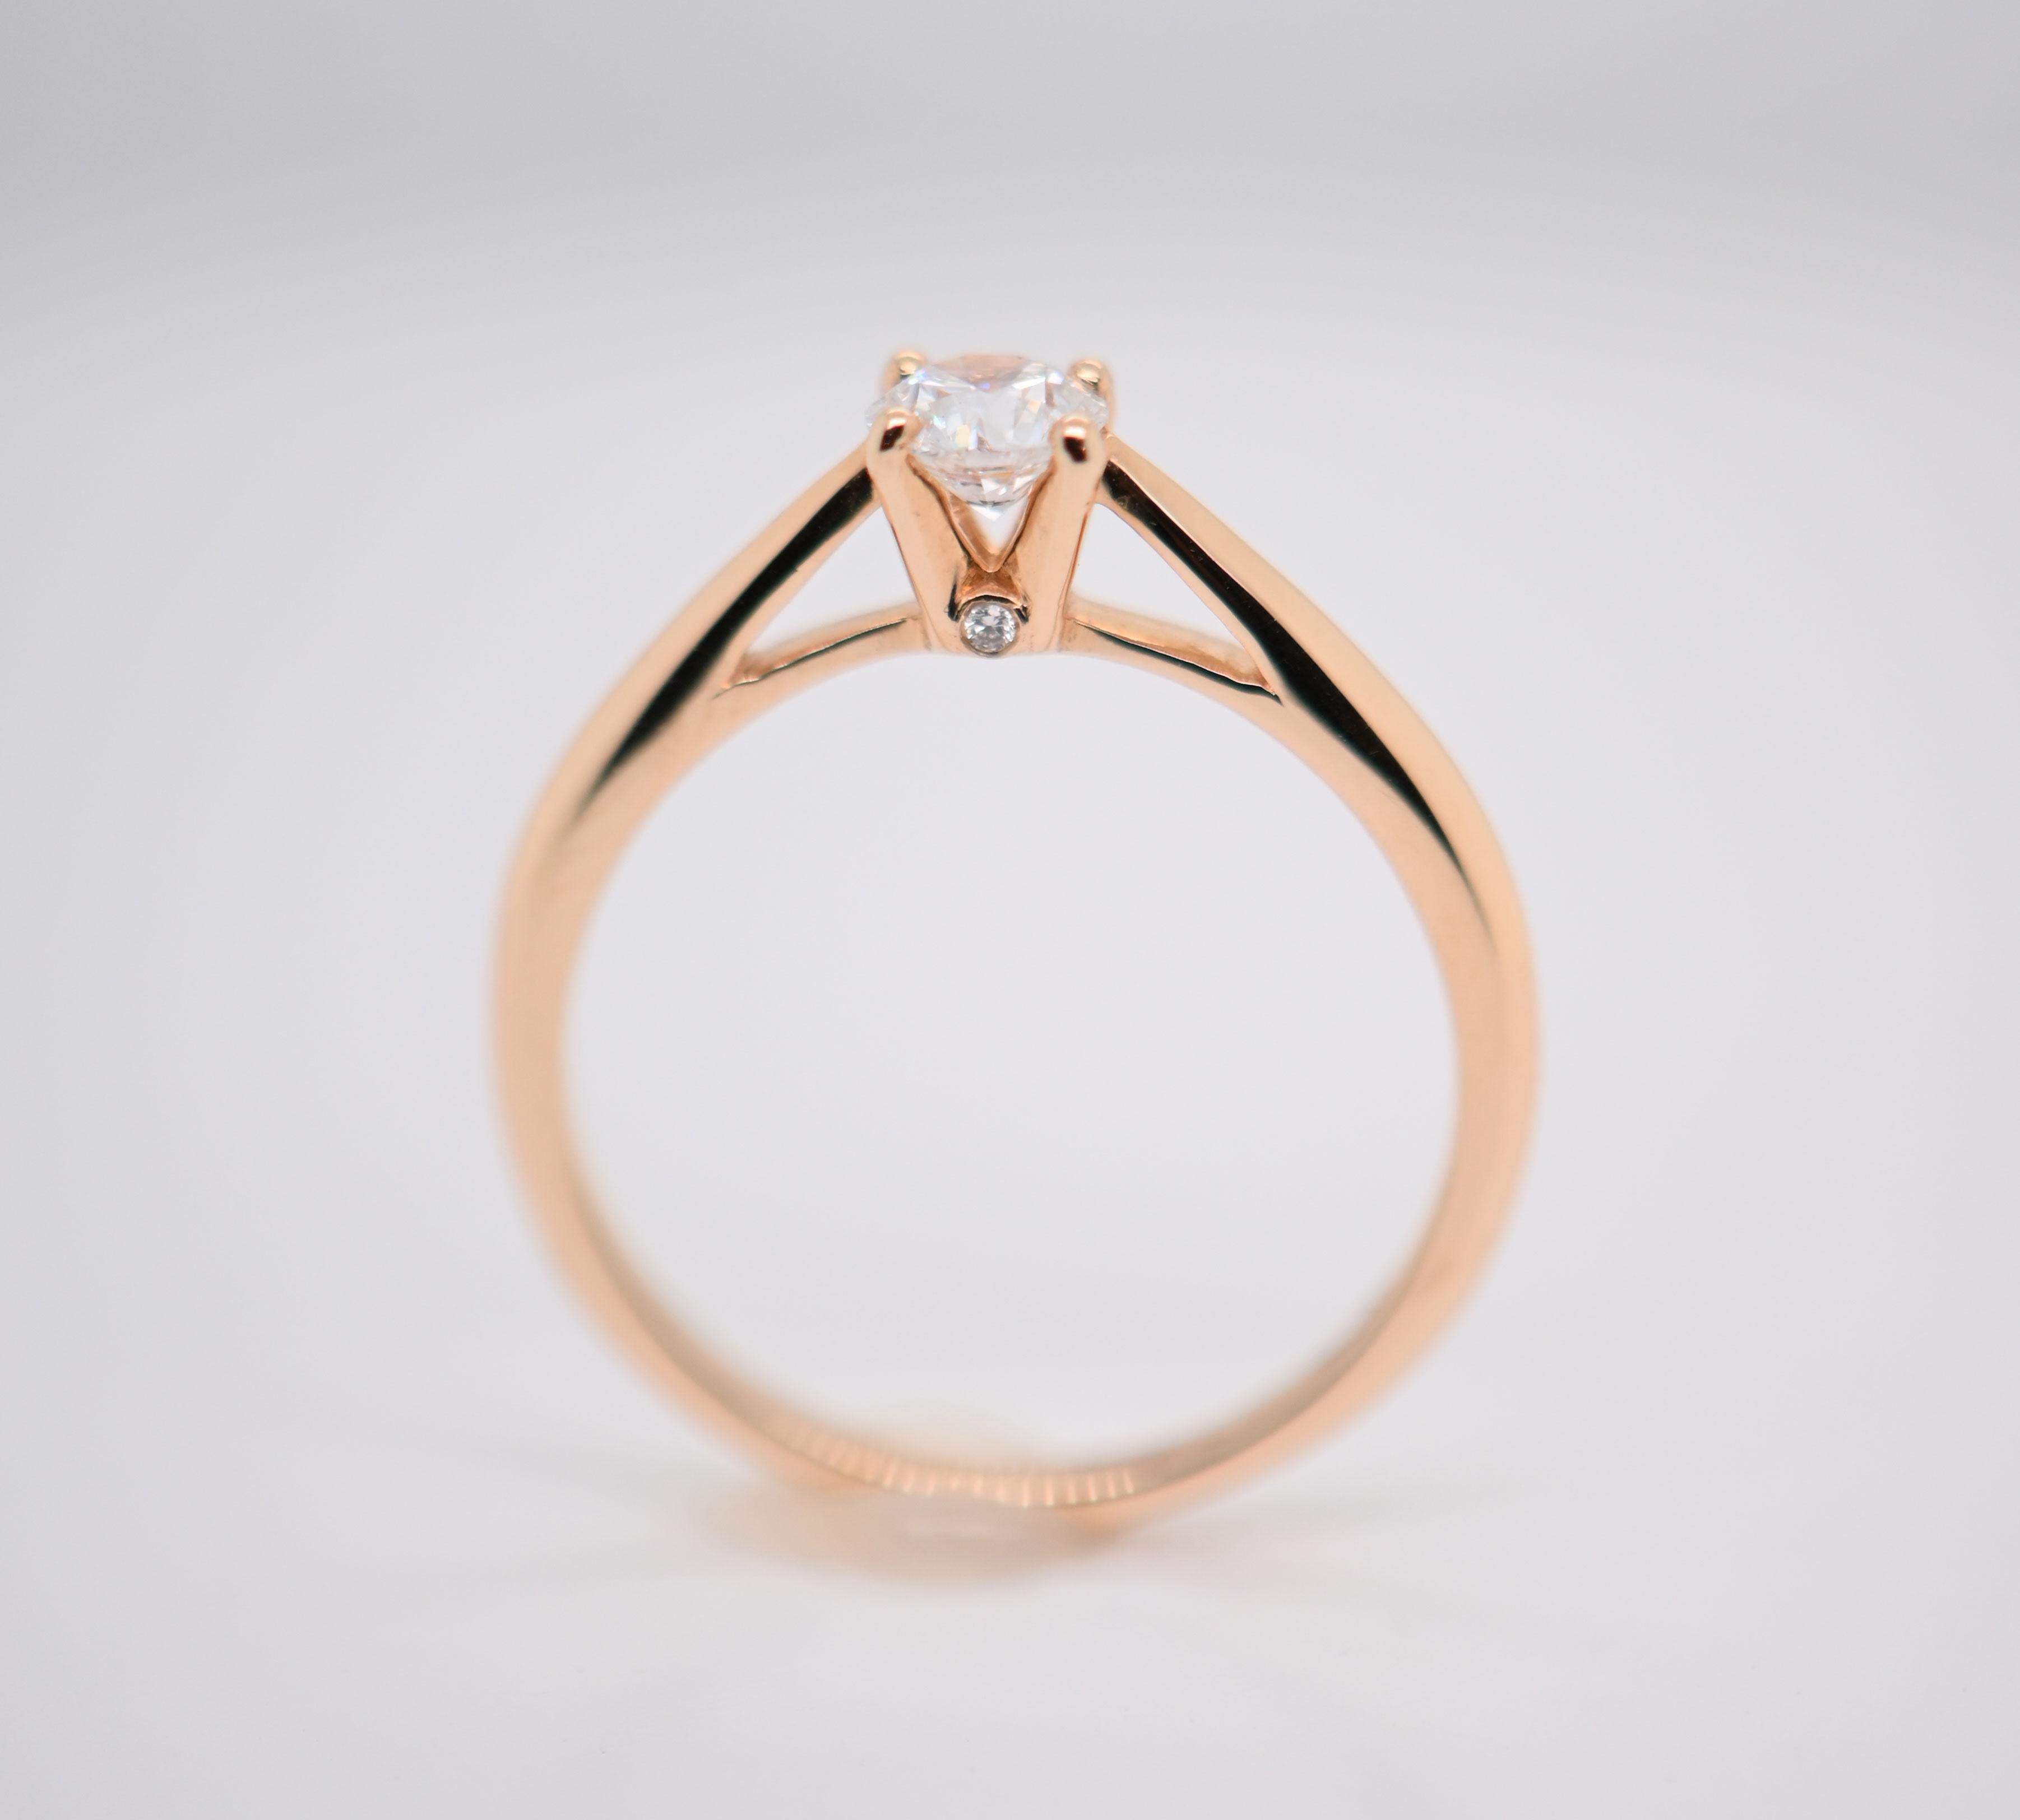 Immerse yourself in the world of luxury with this rose gold solitaire ring.

Main details:

Material: Crafted in 18-carat rose gold, this ring embodies the delicacy and warmth of the precious metal...

Three sparkling diamonds: Three diamonds of